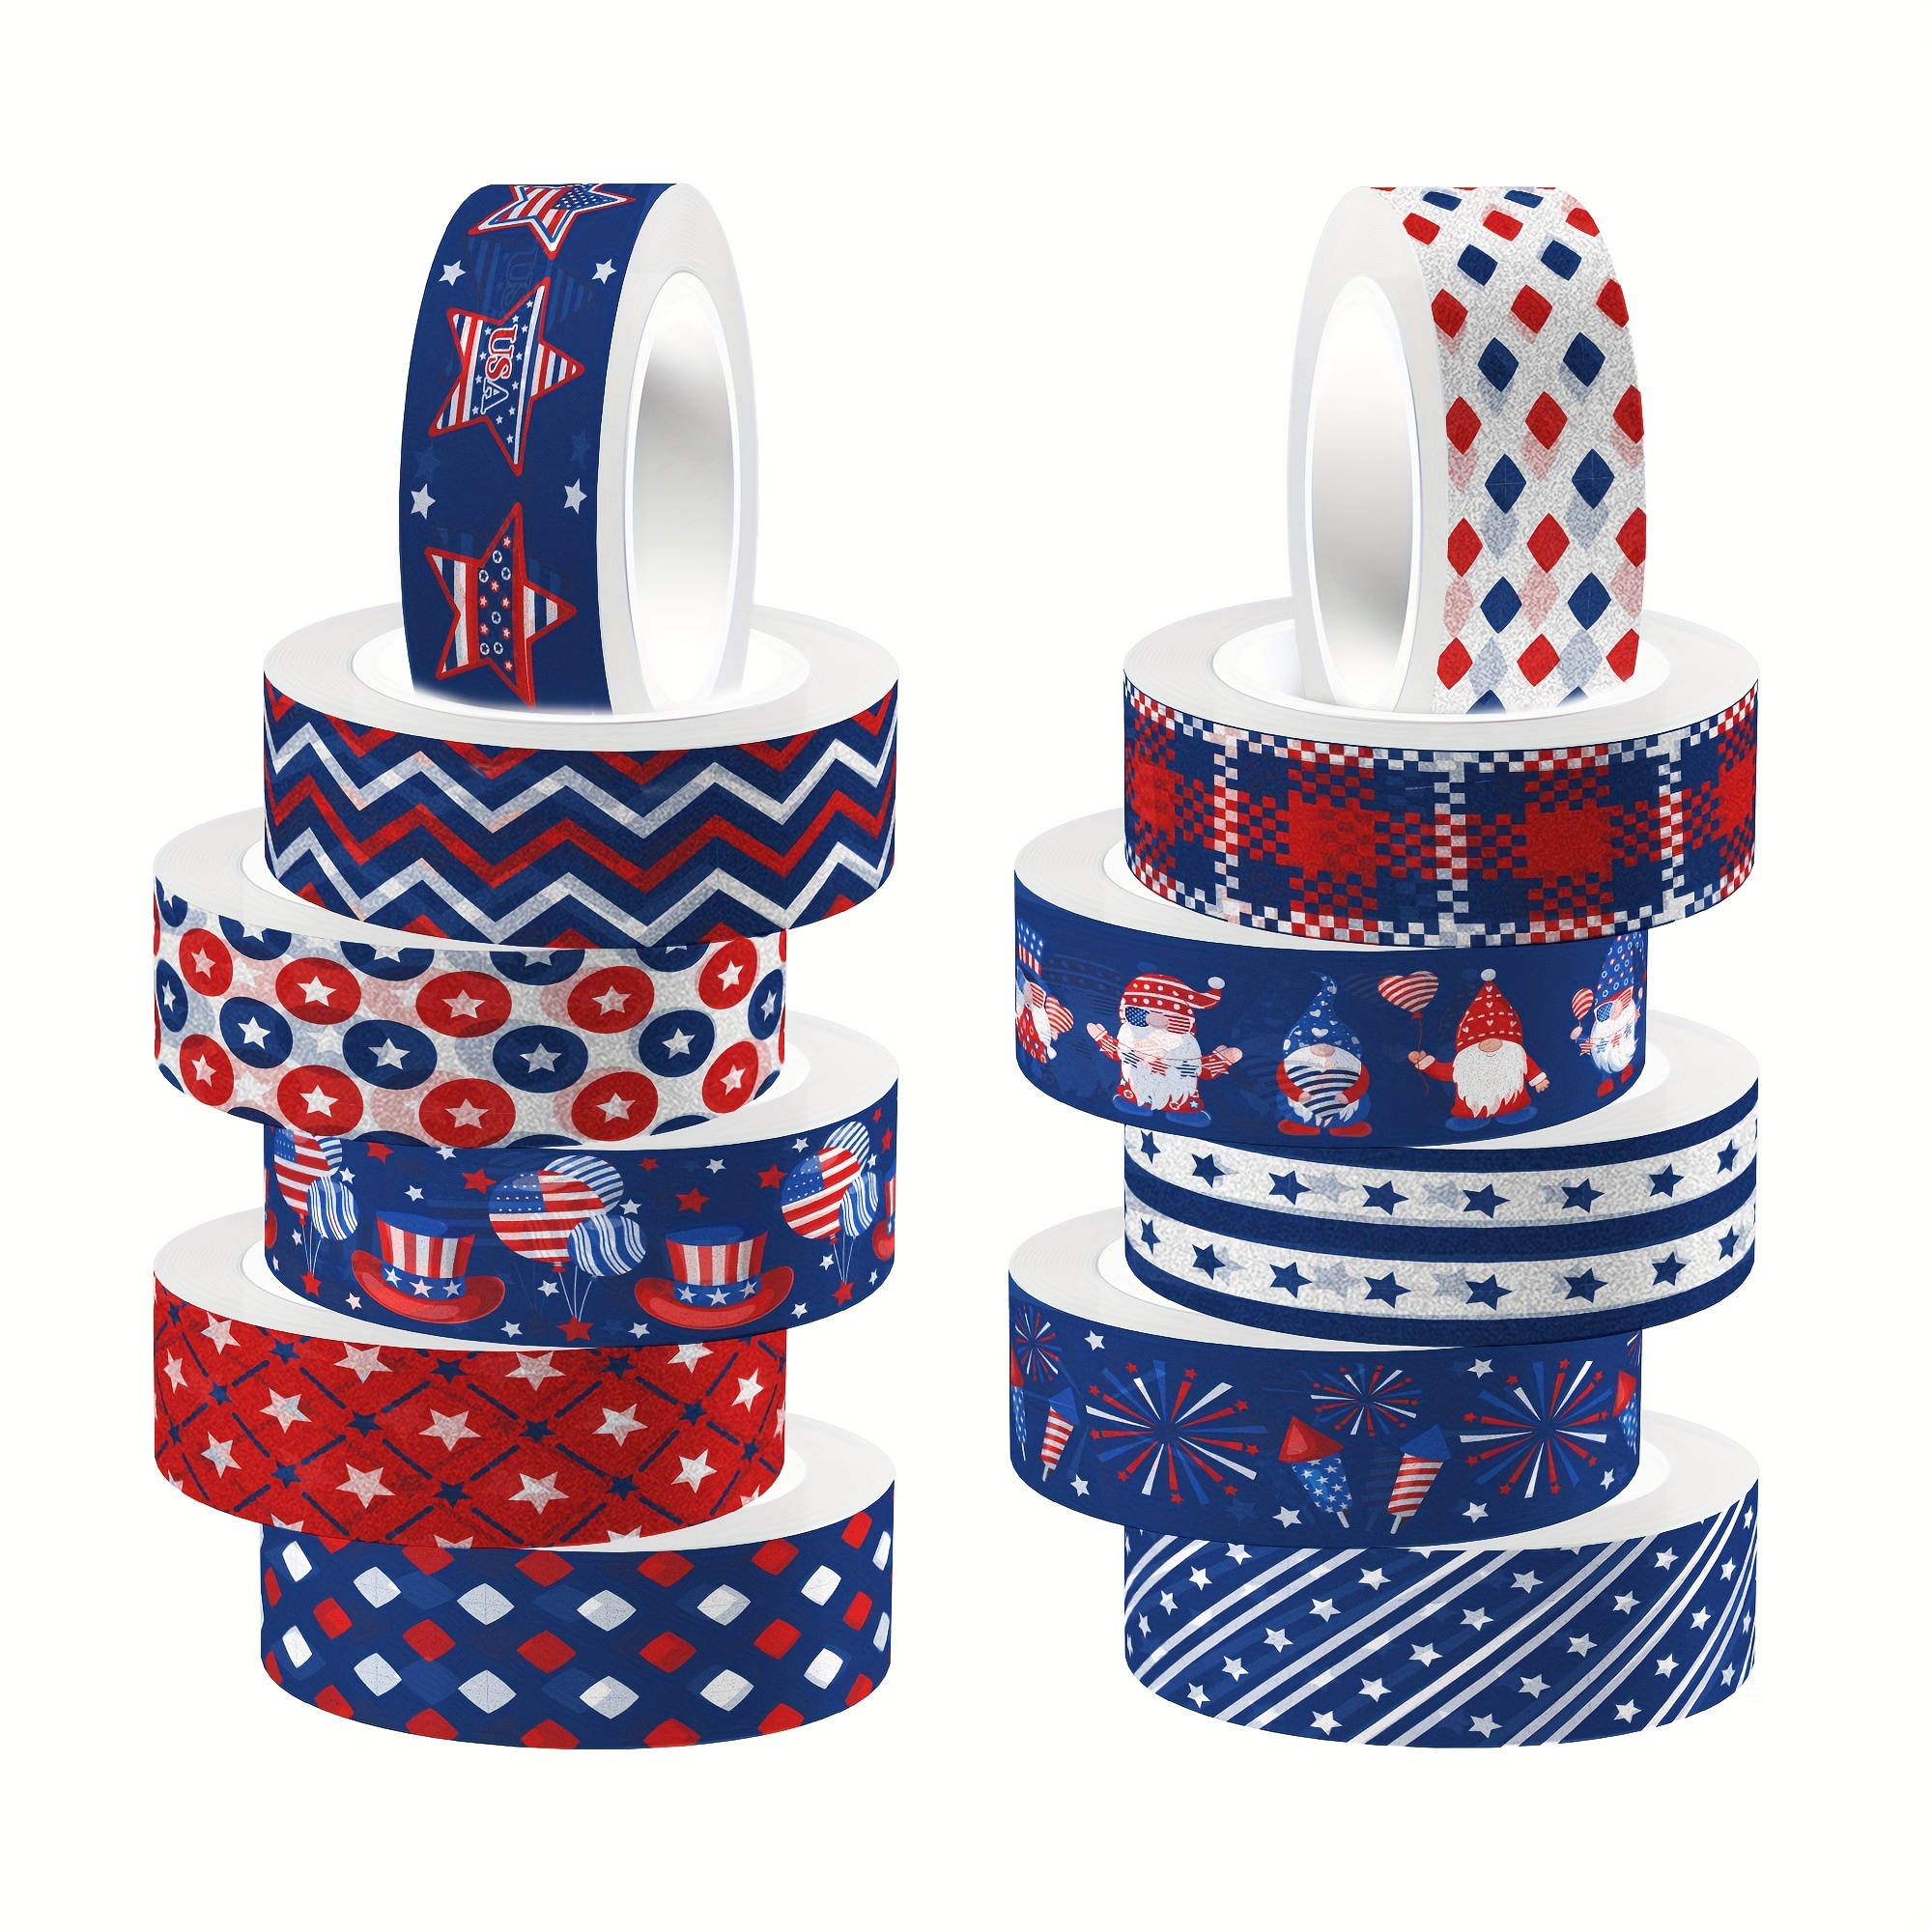 Washi Tape Rolls, Blue with Hearts